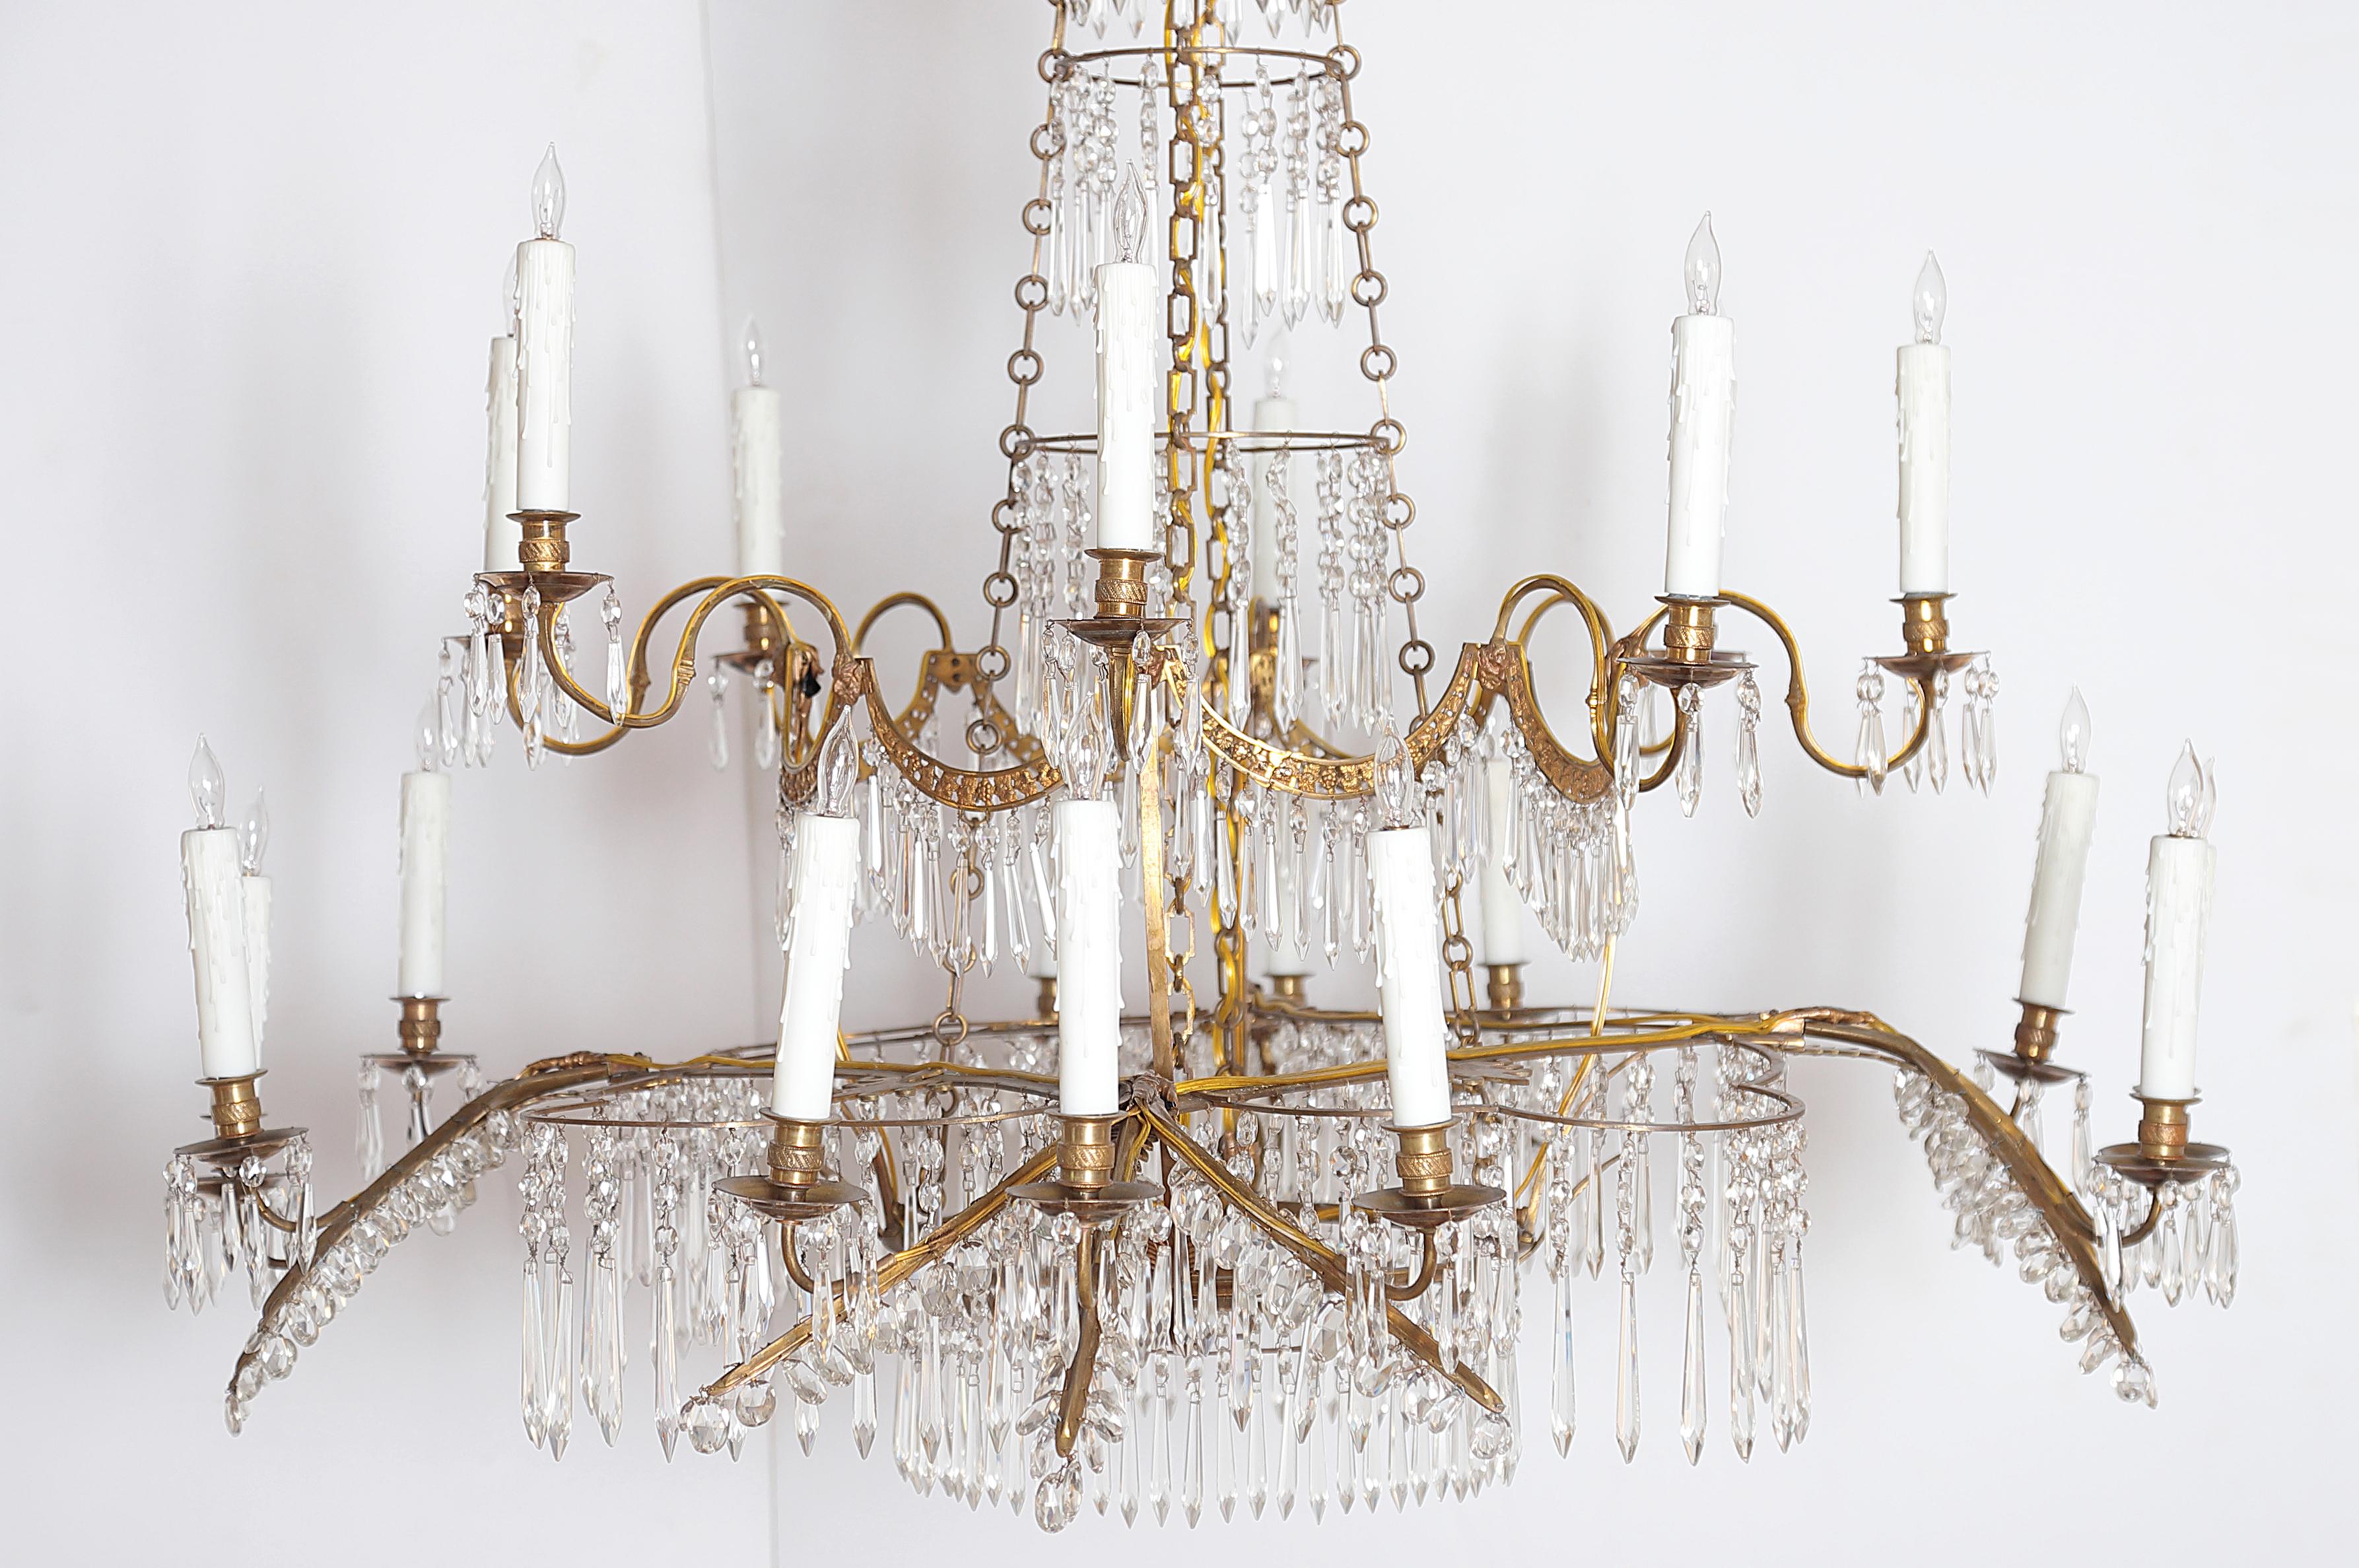 A German neoclassic ormolu and cut-glass twenty light chandelier, lower tier contains four (4) groups of three (3) lights or twelve (12) total, upper tier has two (2) branches for each of the four (4) groups below or eight (8) total, circa 1795,